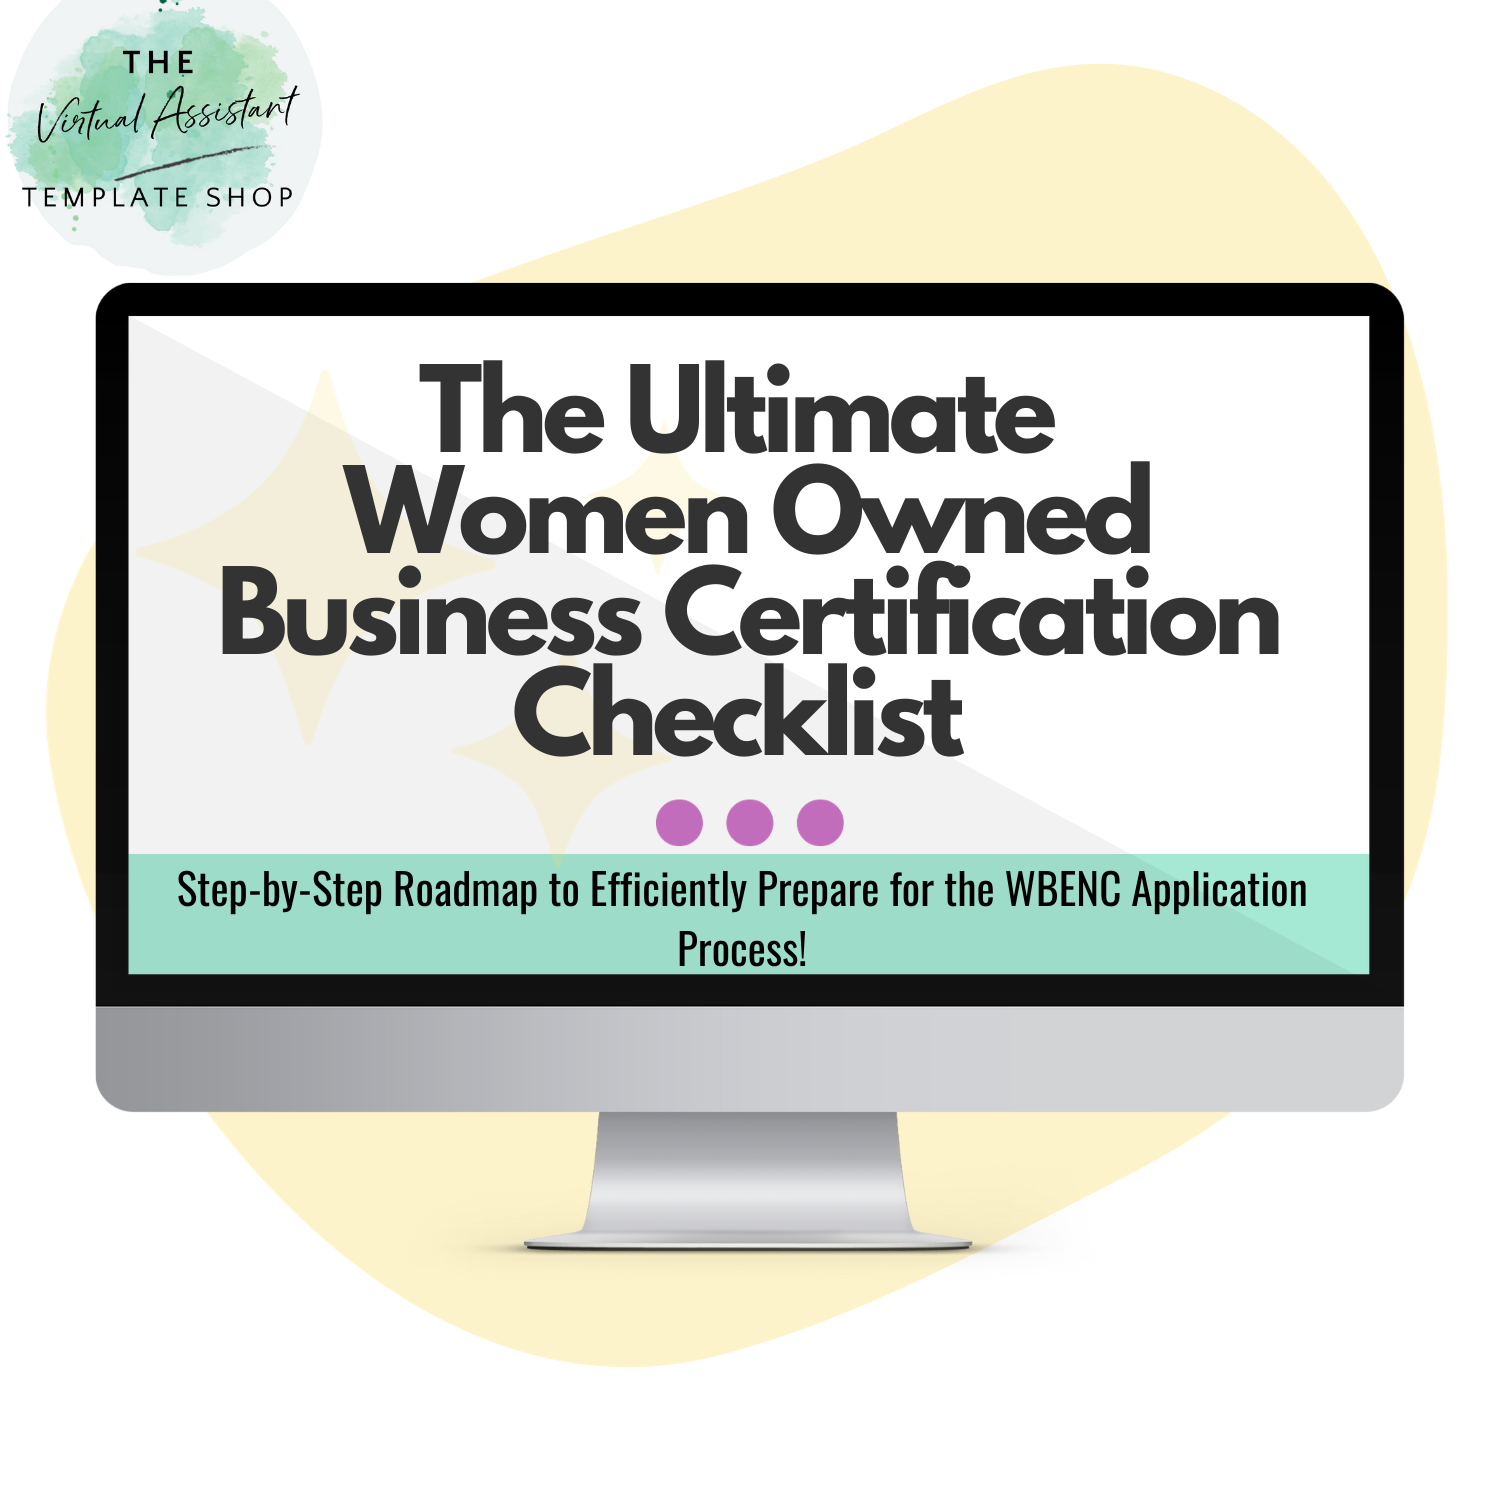 Familiarize yourself with the WBENC process and ensure your business meets all requisite criteria to become certified. Our downloadable spreadsheet will keep you organized and guide you every step of the way!